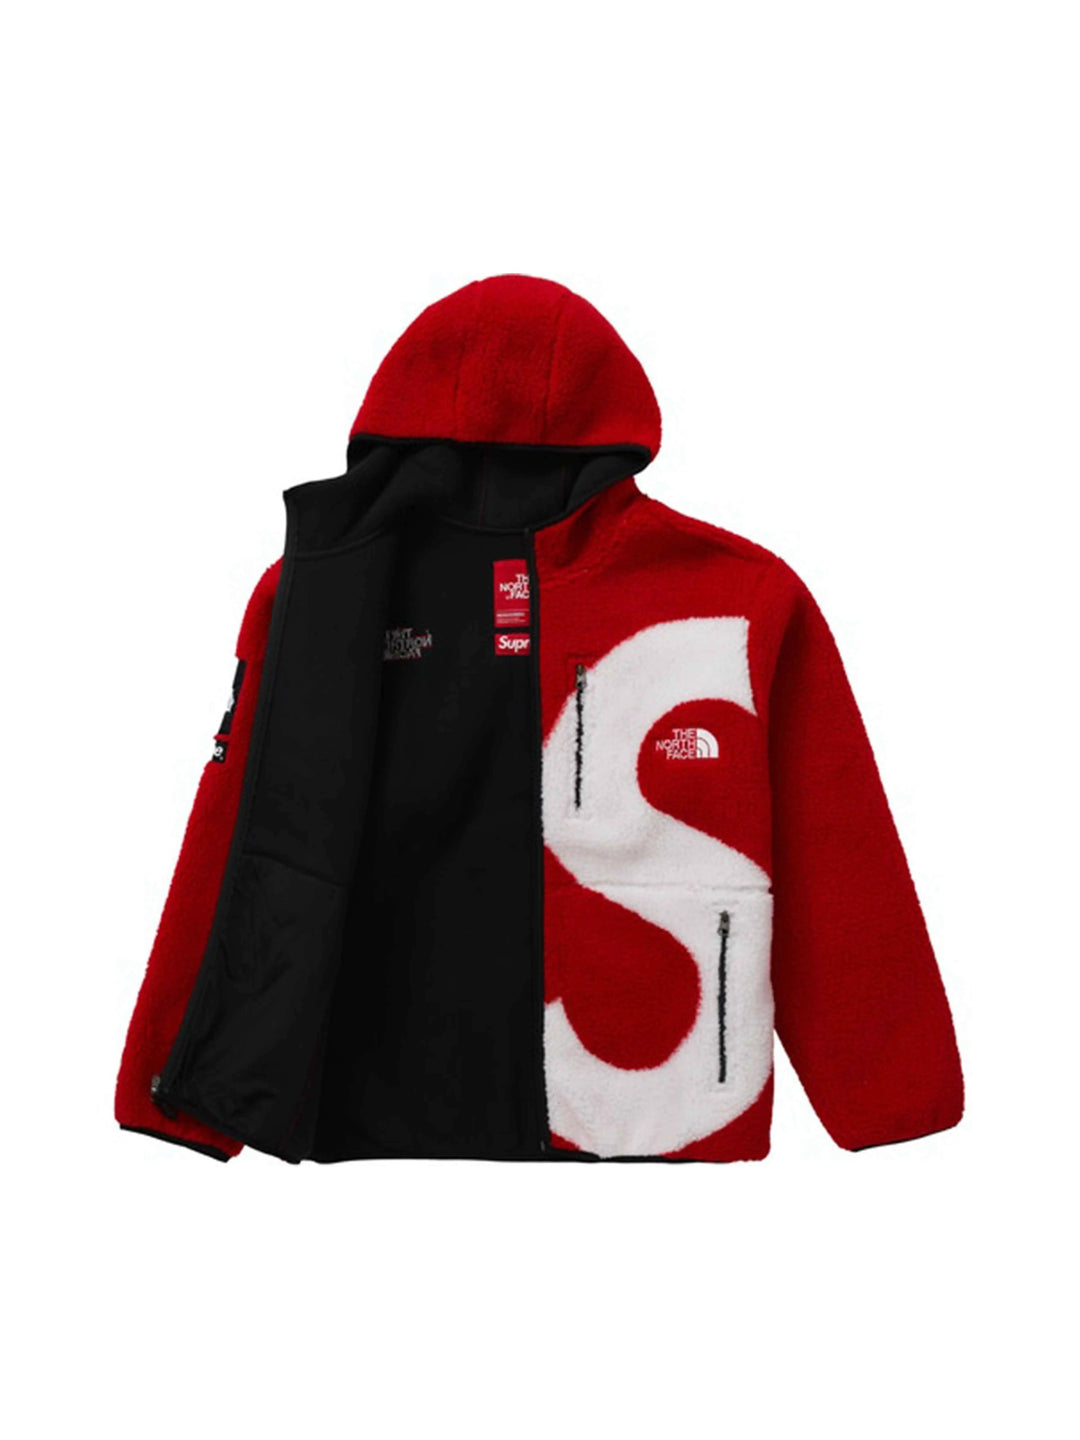 Supreme The North Face S Logo Fleece Jacket Red [FW20] Supreme